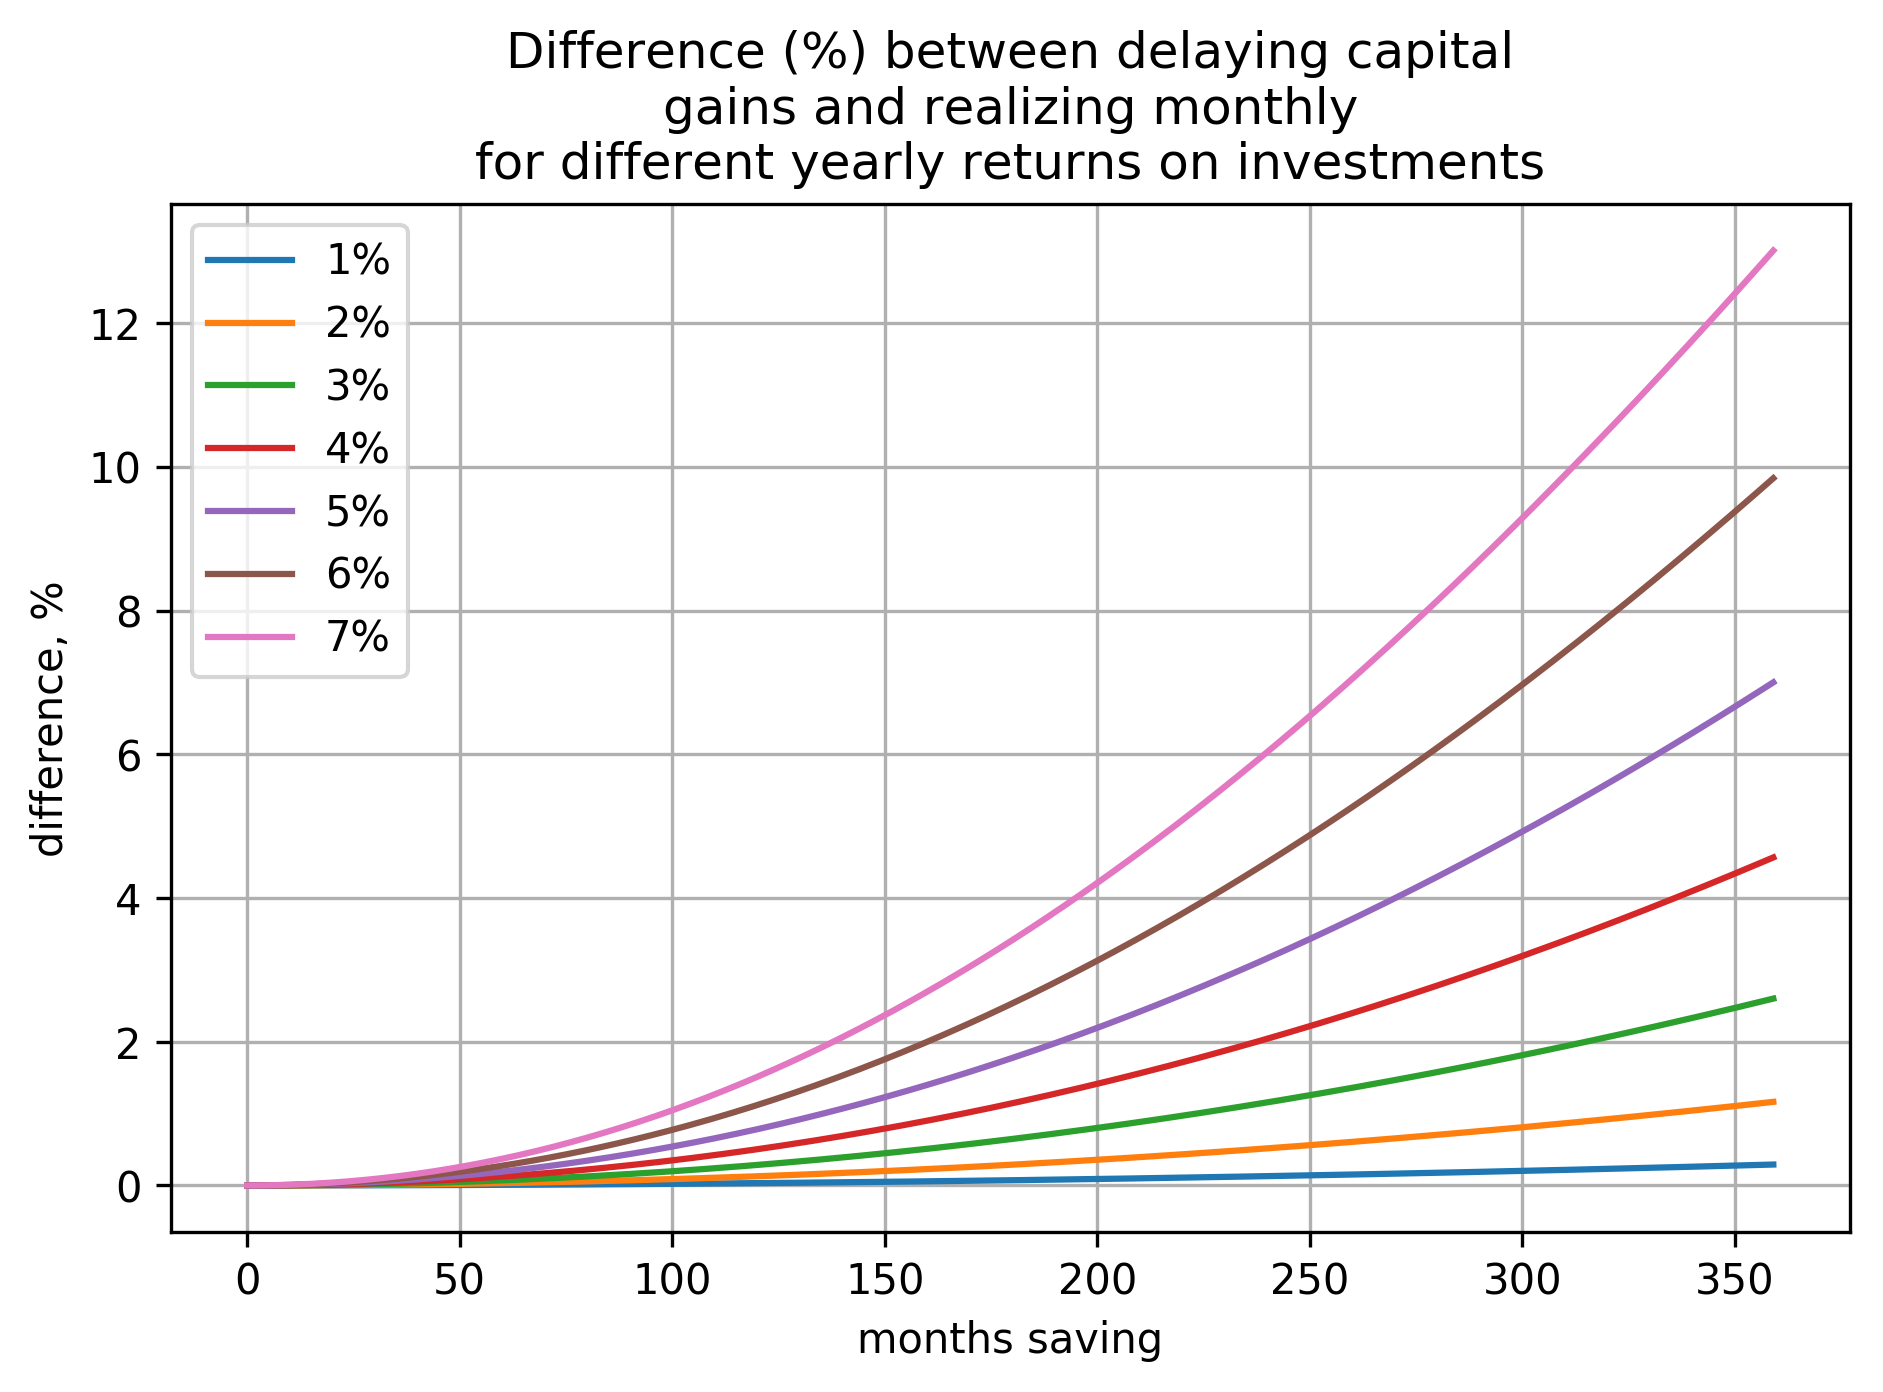 a plot showing how difference (in percents) between the two cases (delaying capital gains and
realizing them monthly) depends on number of months invested and yearly return on
investment